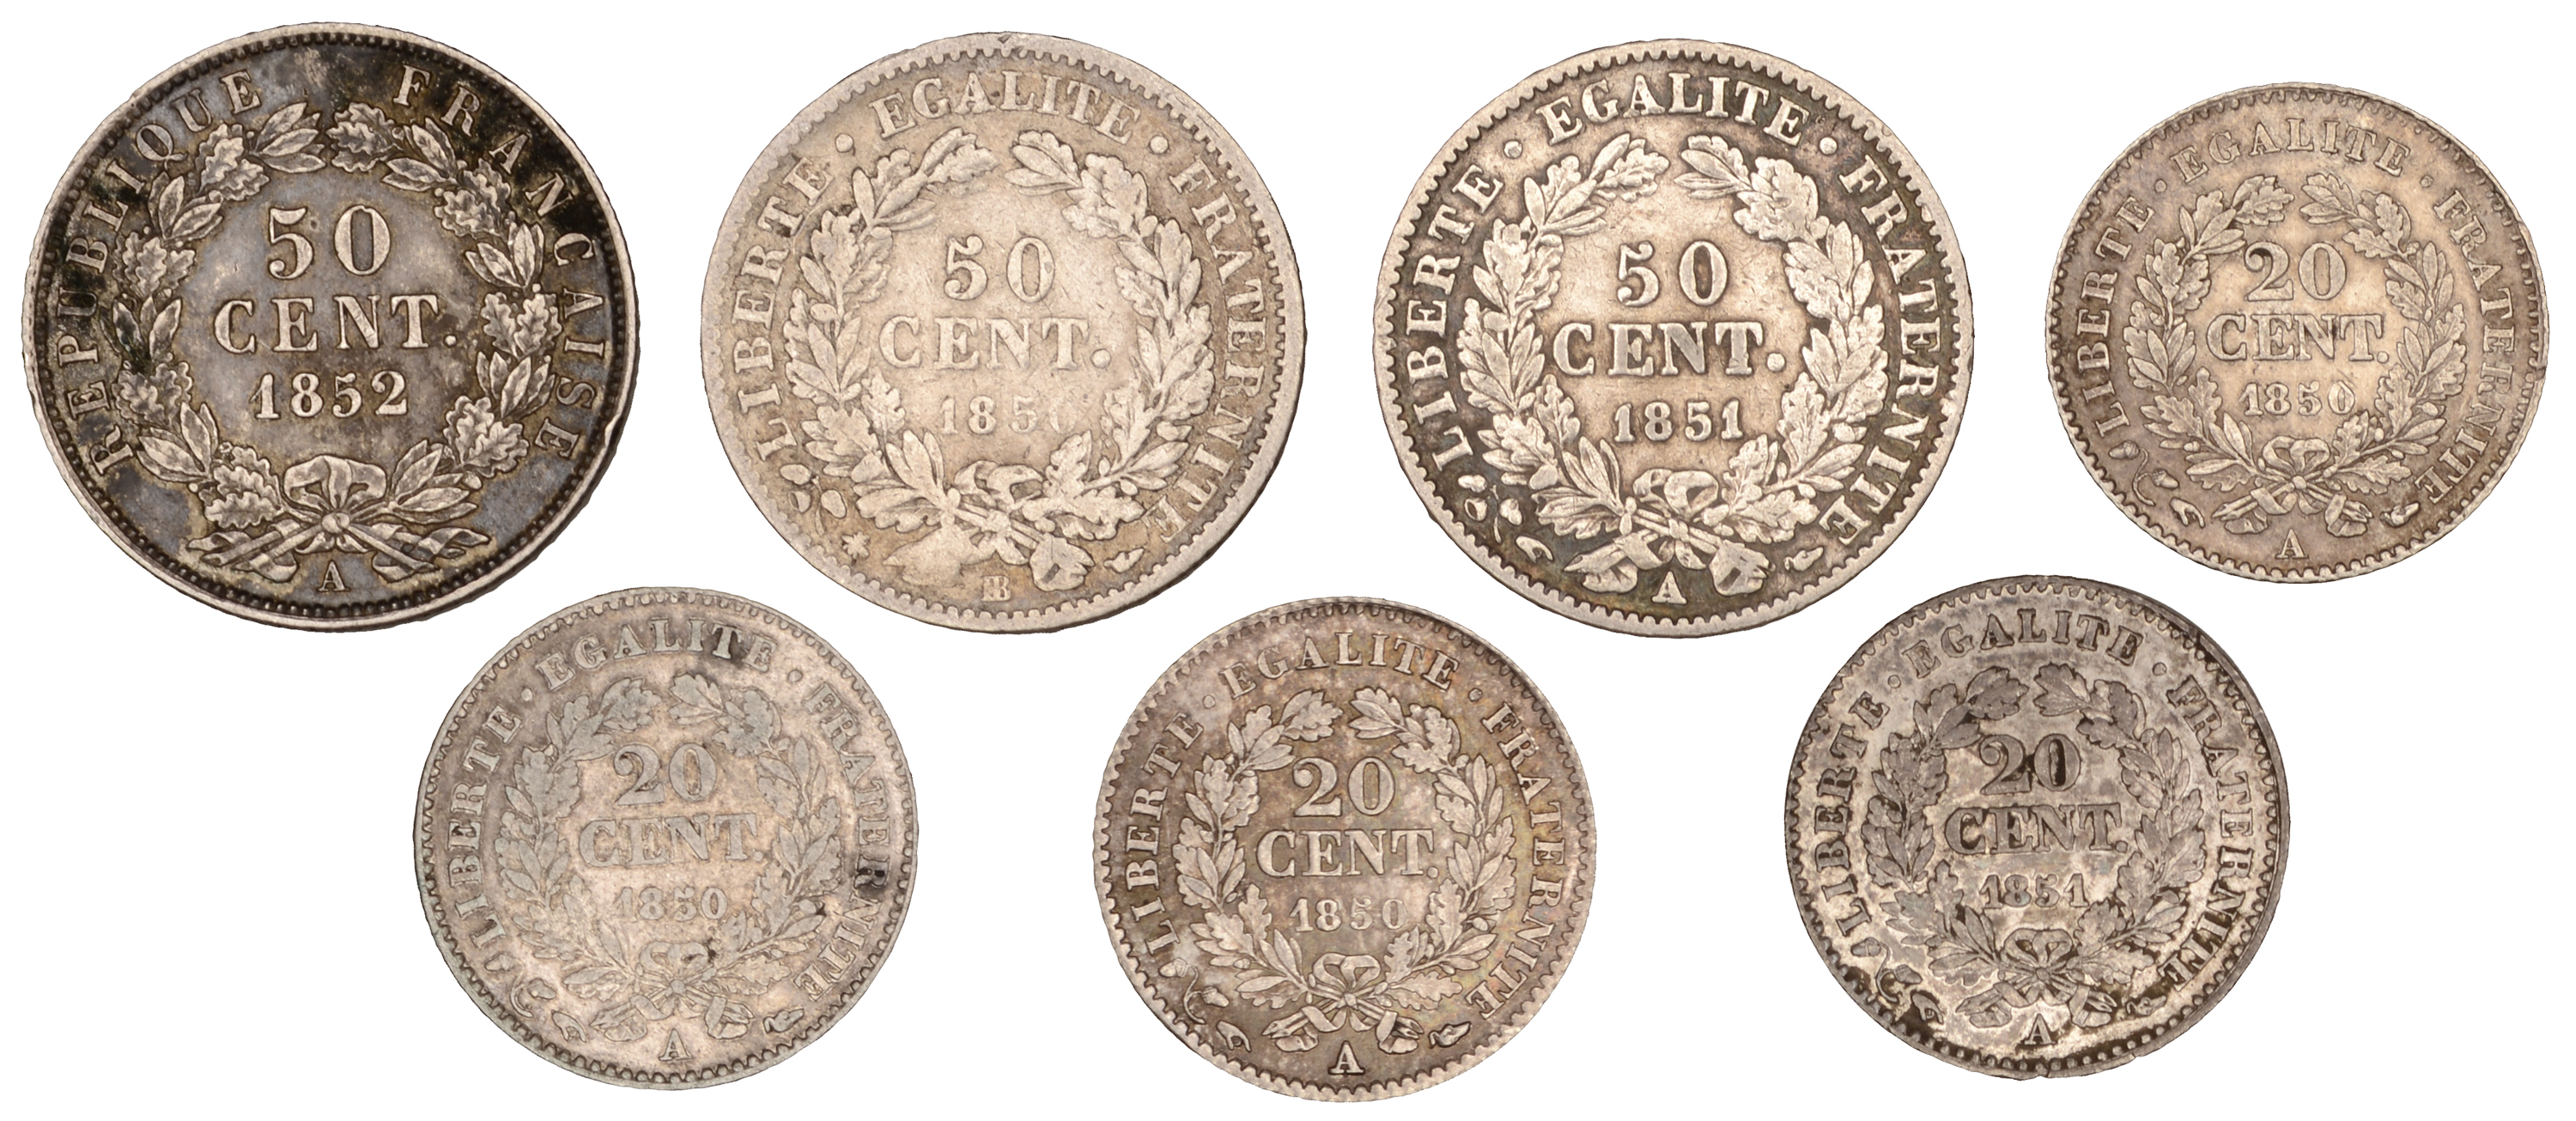 France, Second Republic (1848-1852), 50 Centimes (3), 1850bb, 1851a, 1852a (Gad. 411-2); 20... - Image 2 of 2